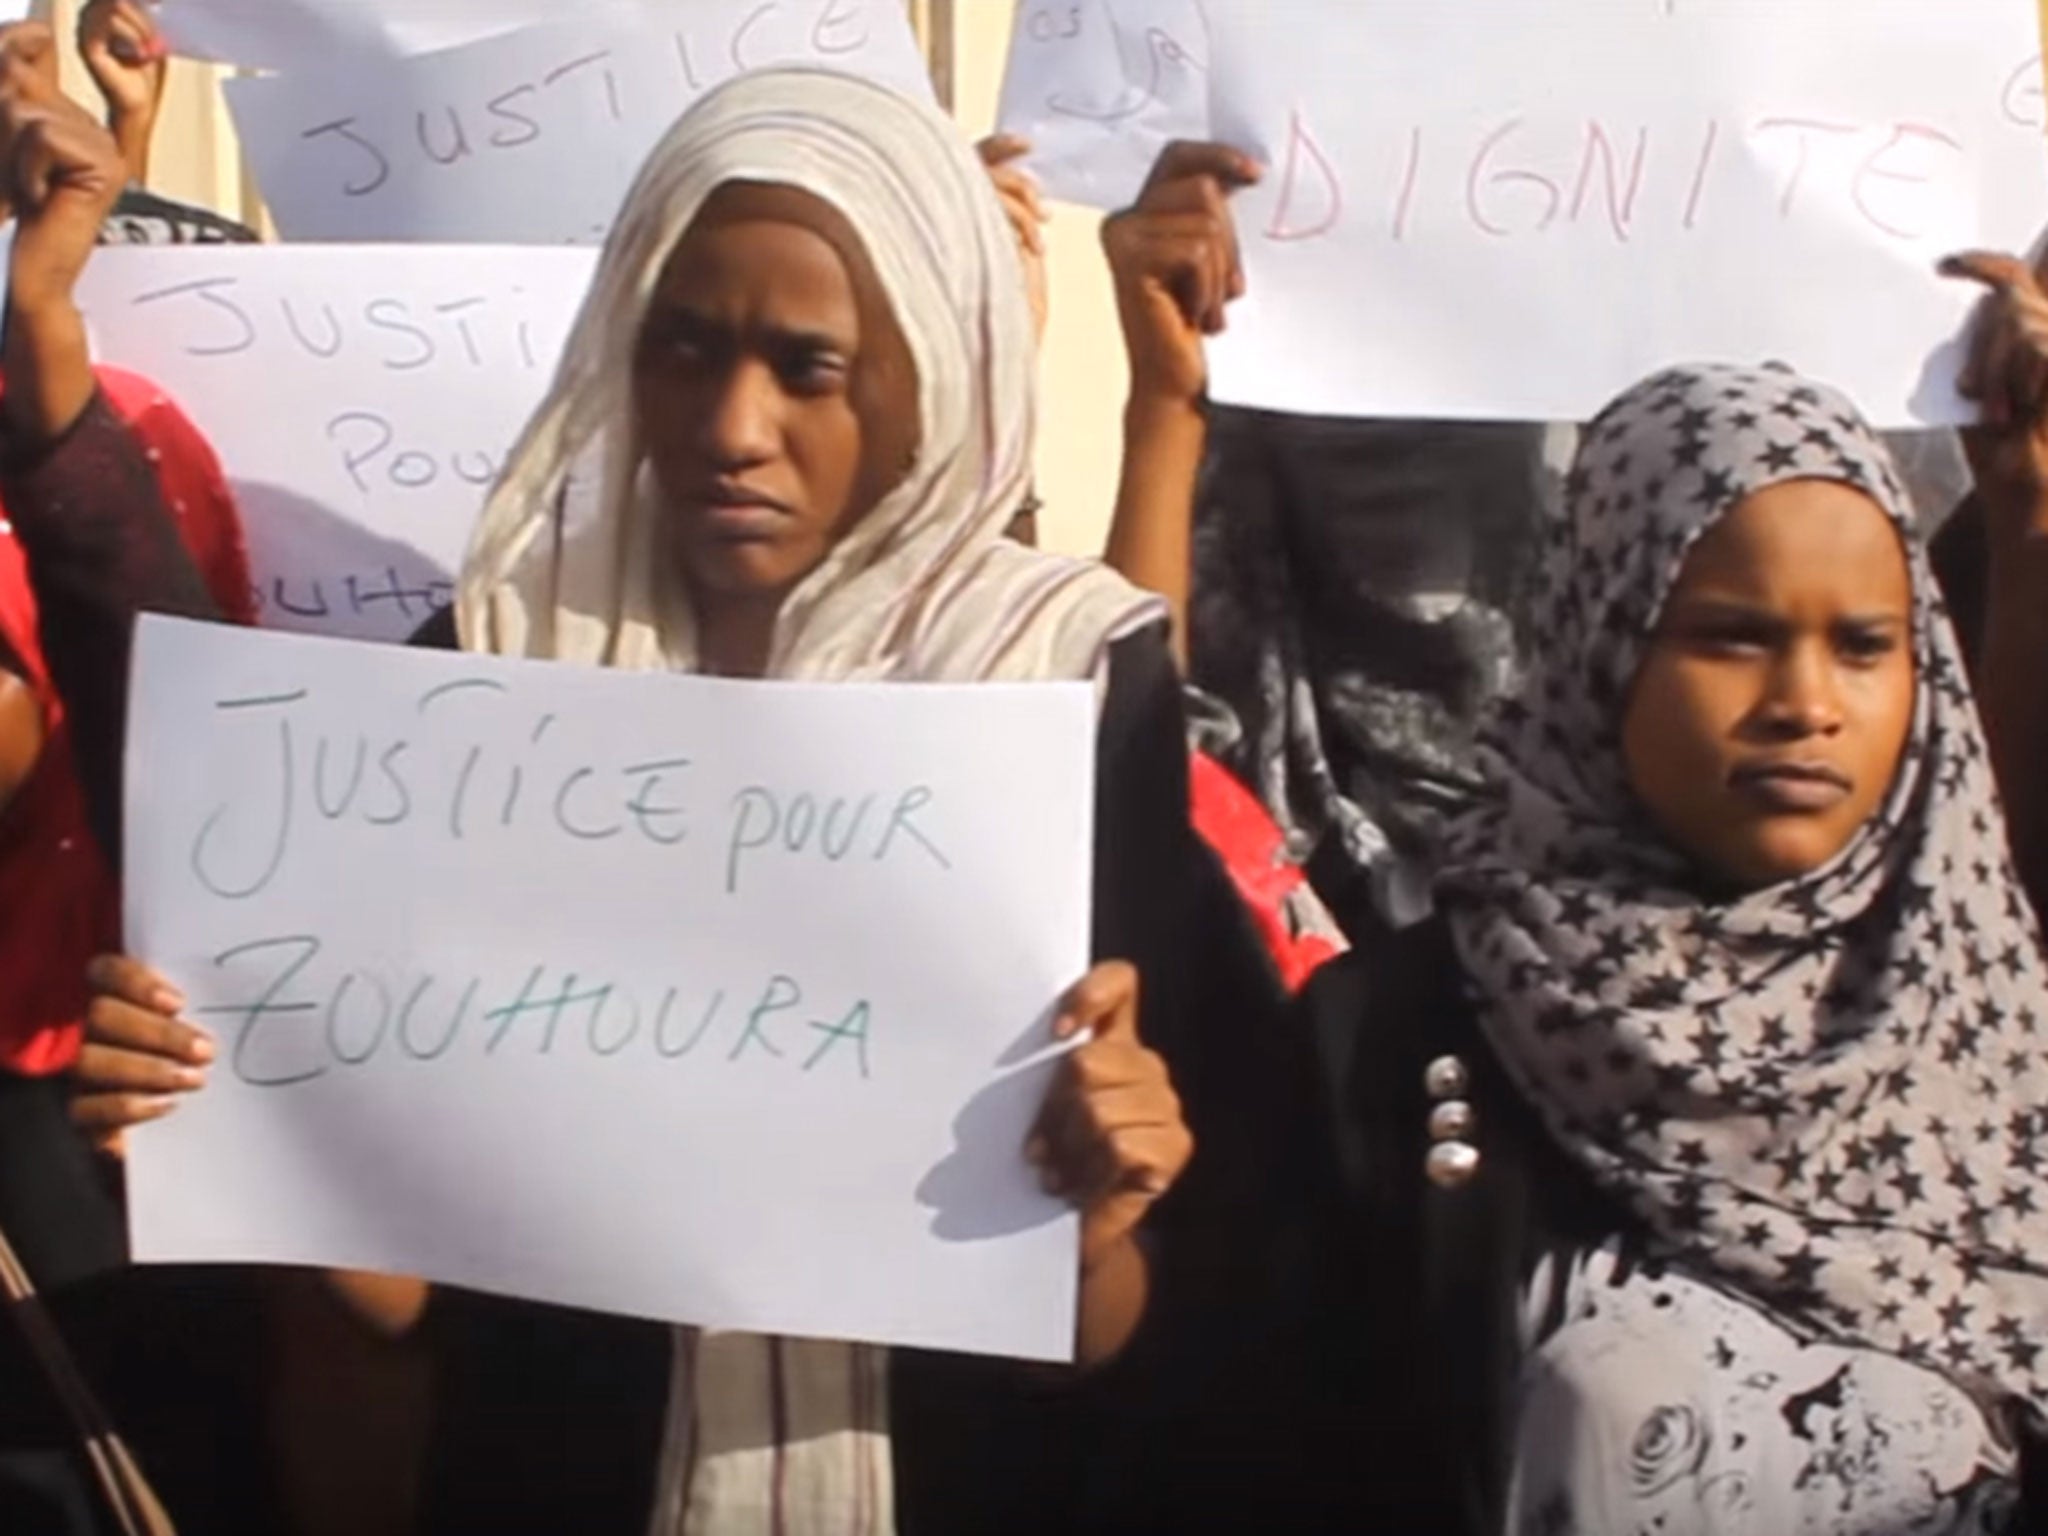 People in Chad have been protesting about the rape of Zouhoura Ibrahim